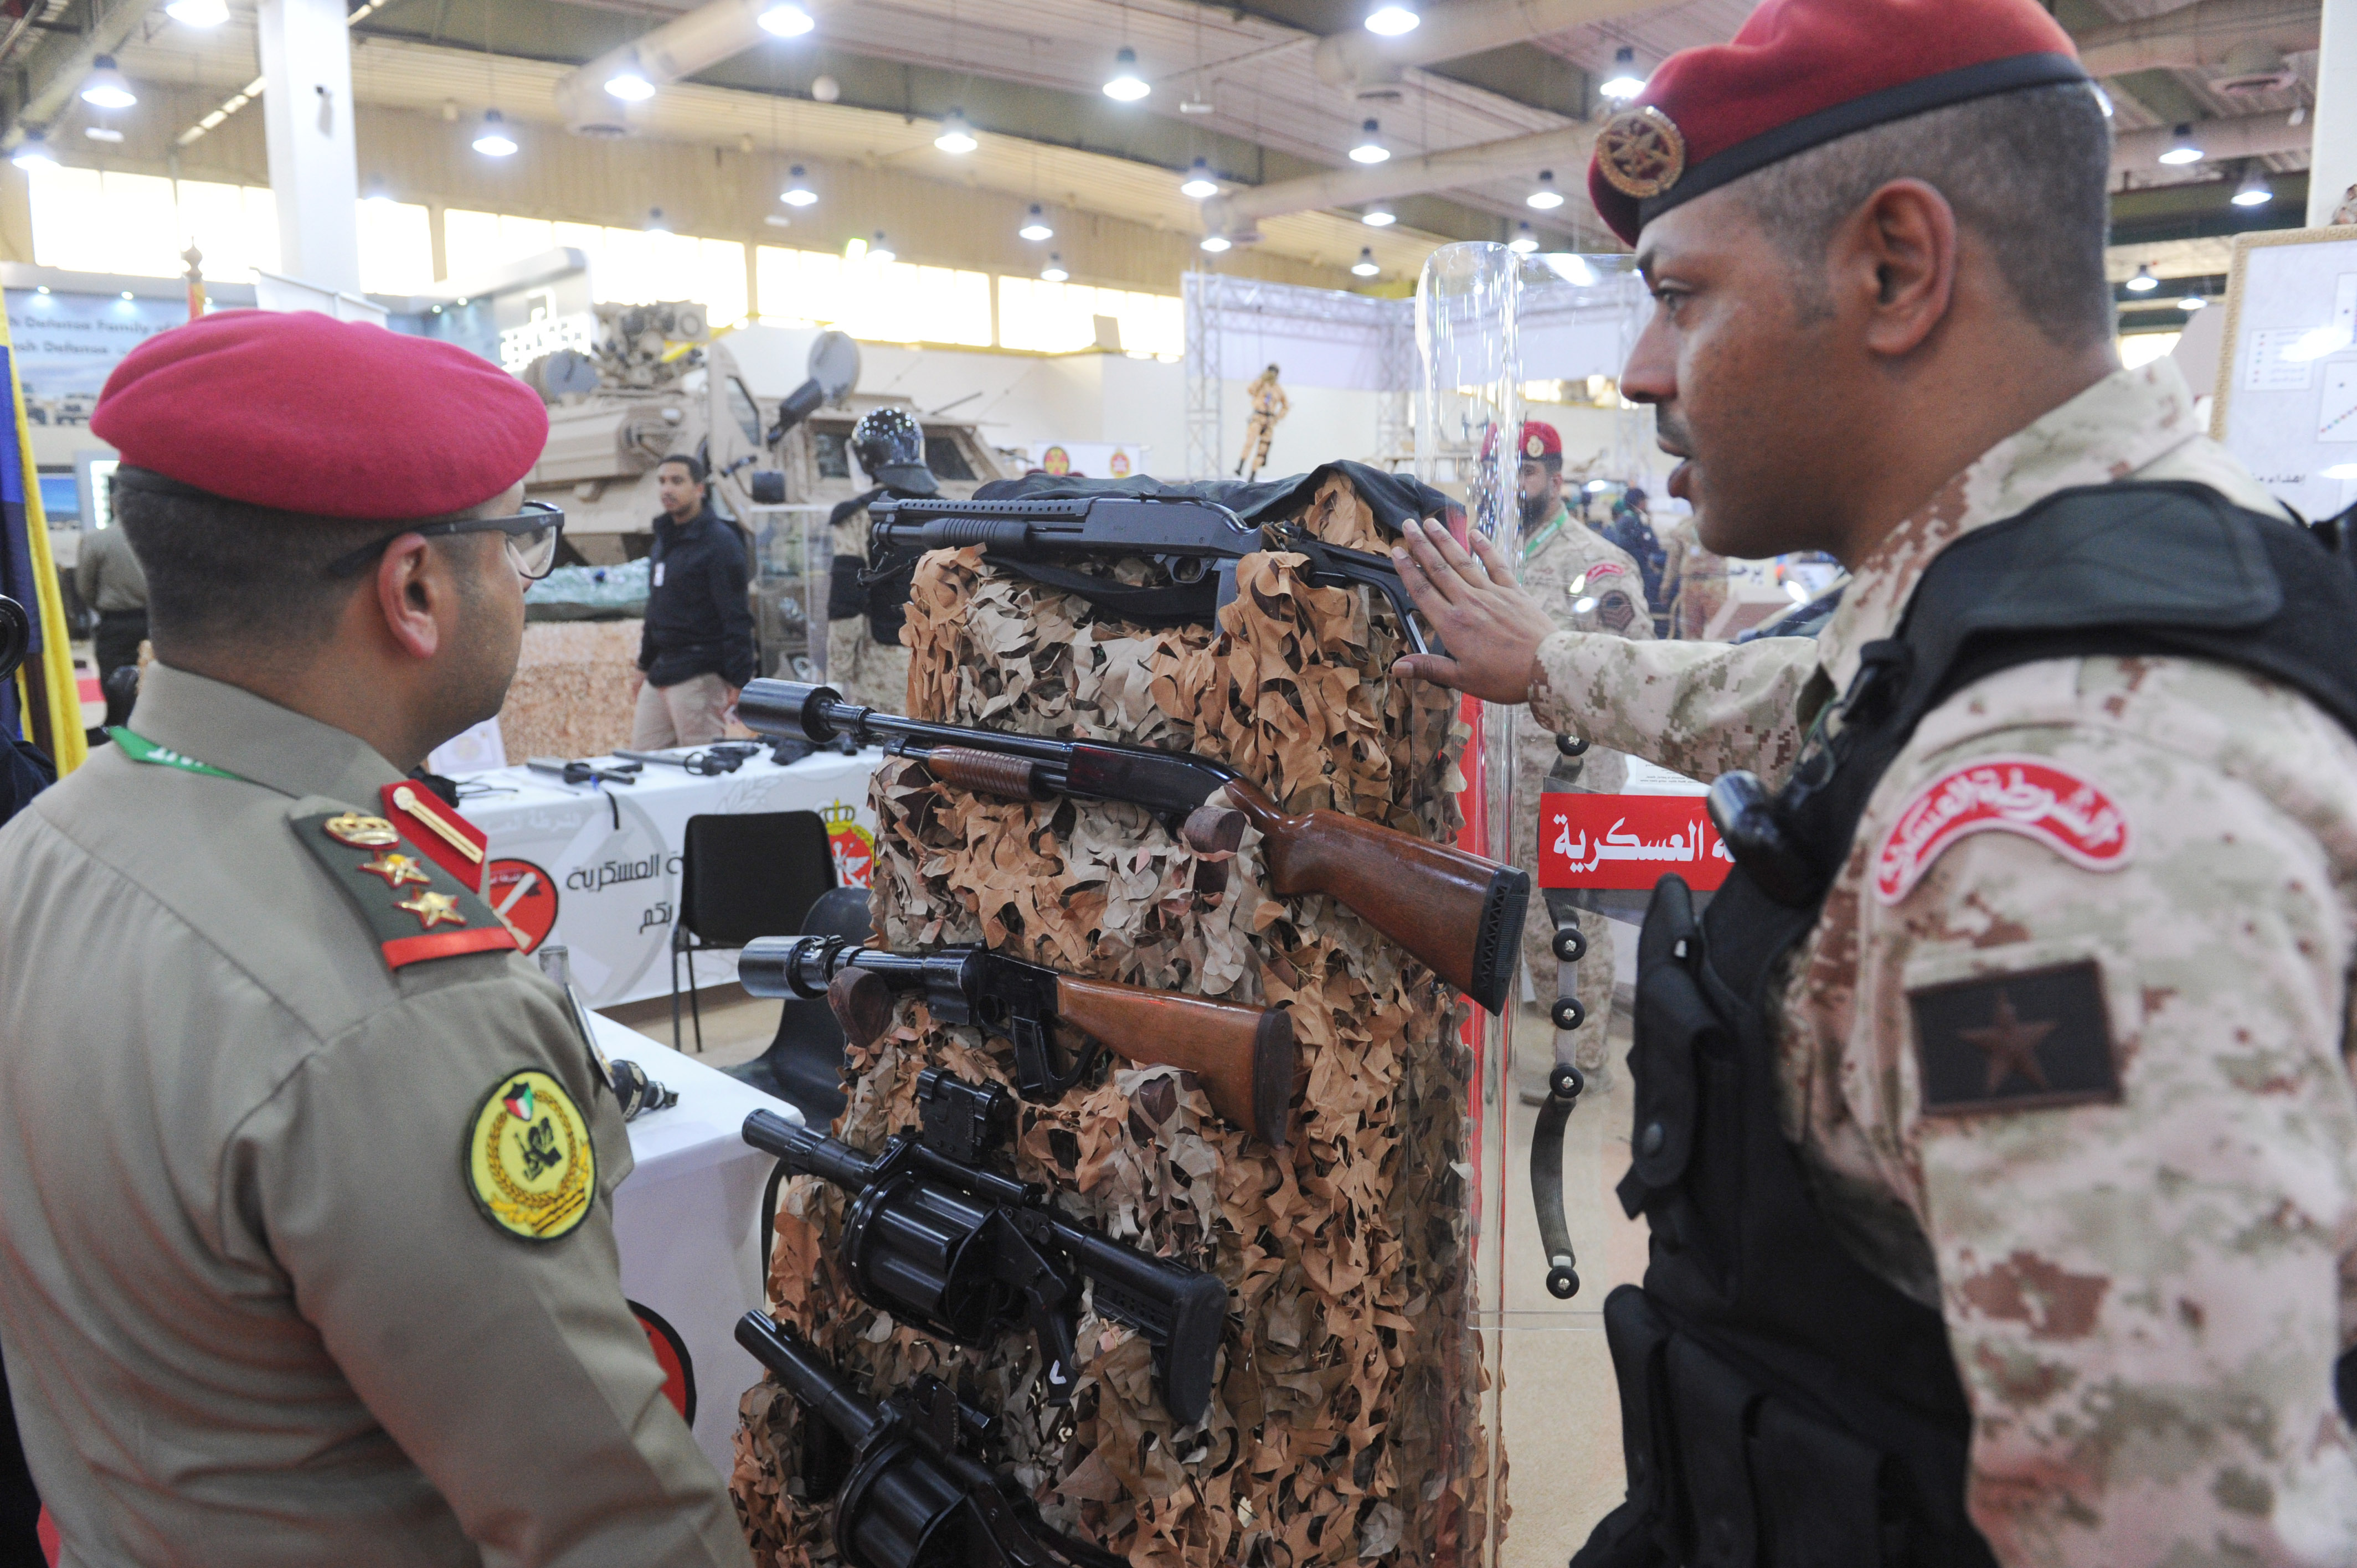 Kuwait Military Police participated in the exhibition